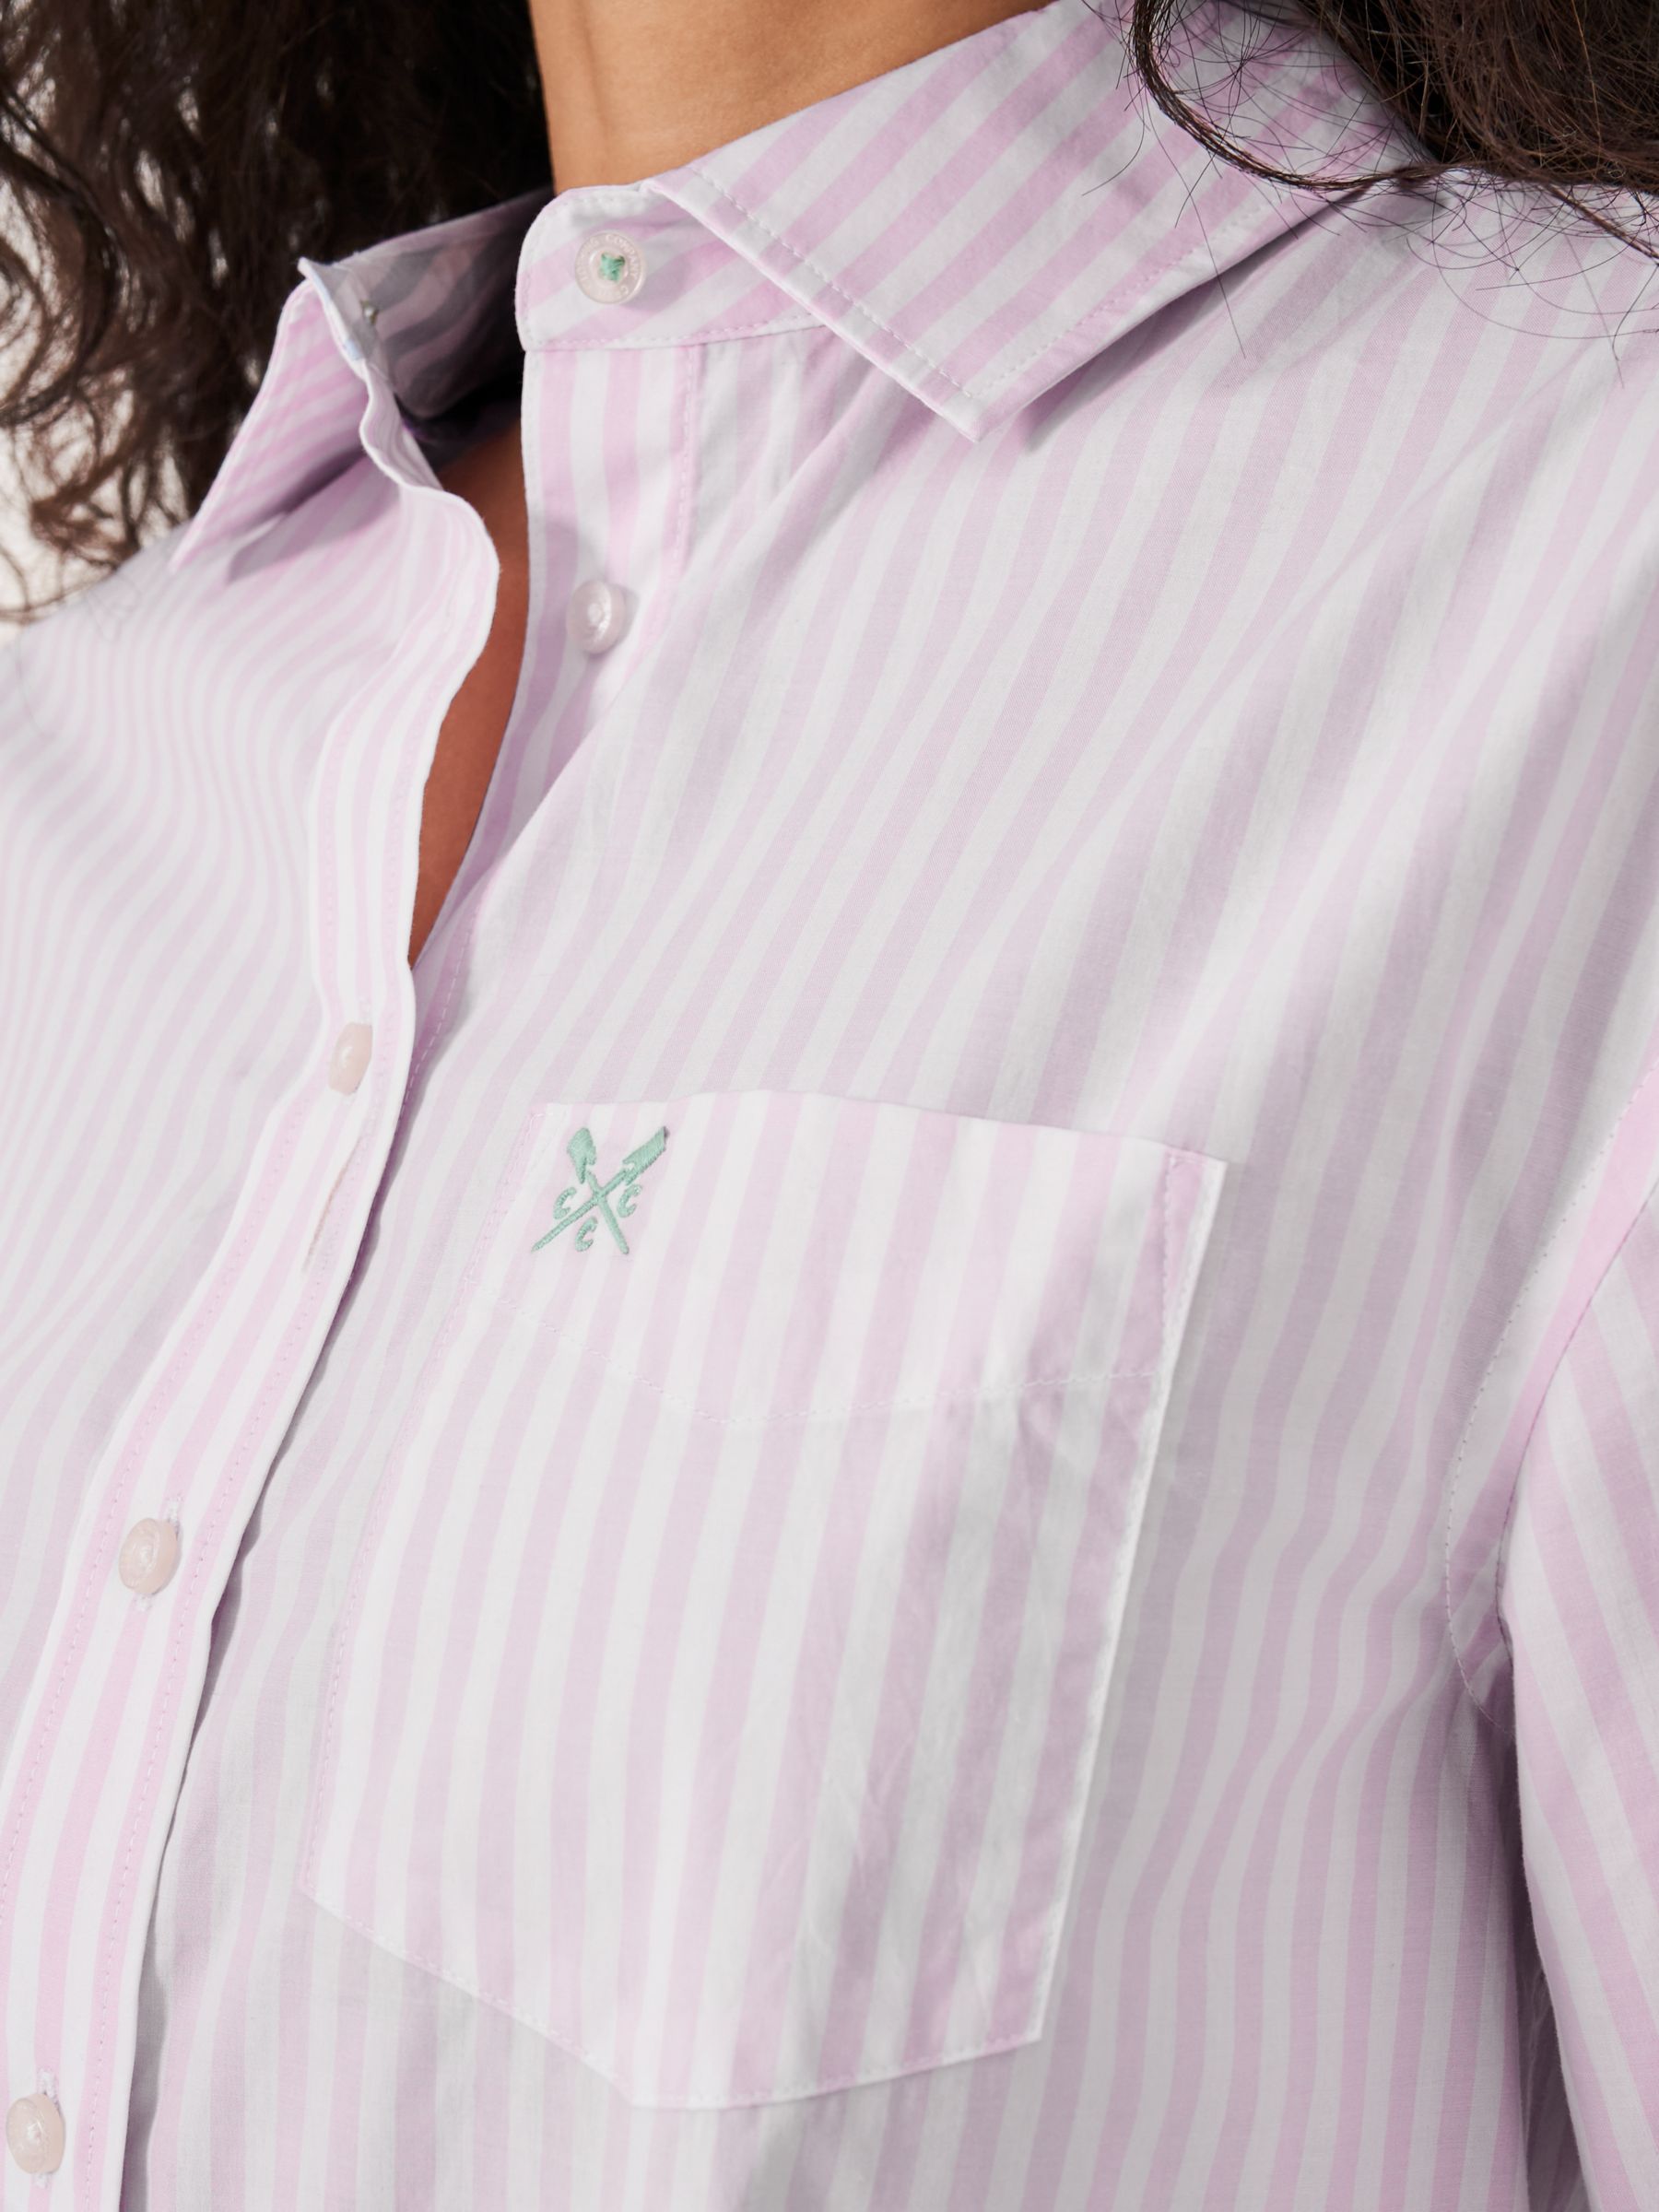 Buy Crew Clothing Relaxed Fit Stripe Shirt, Pink Online at johnlewis.com